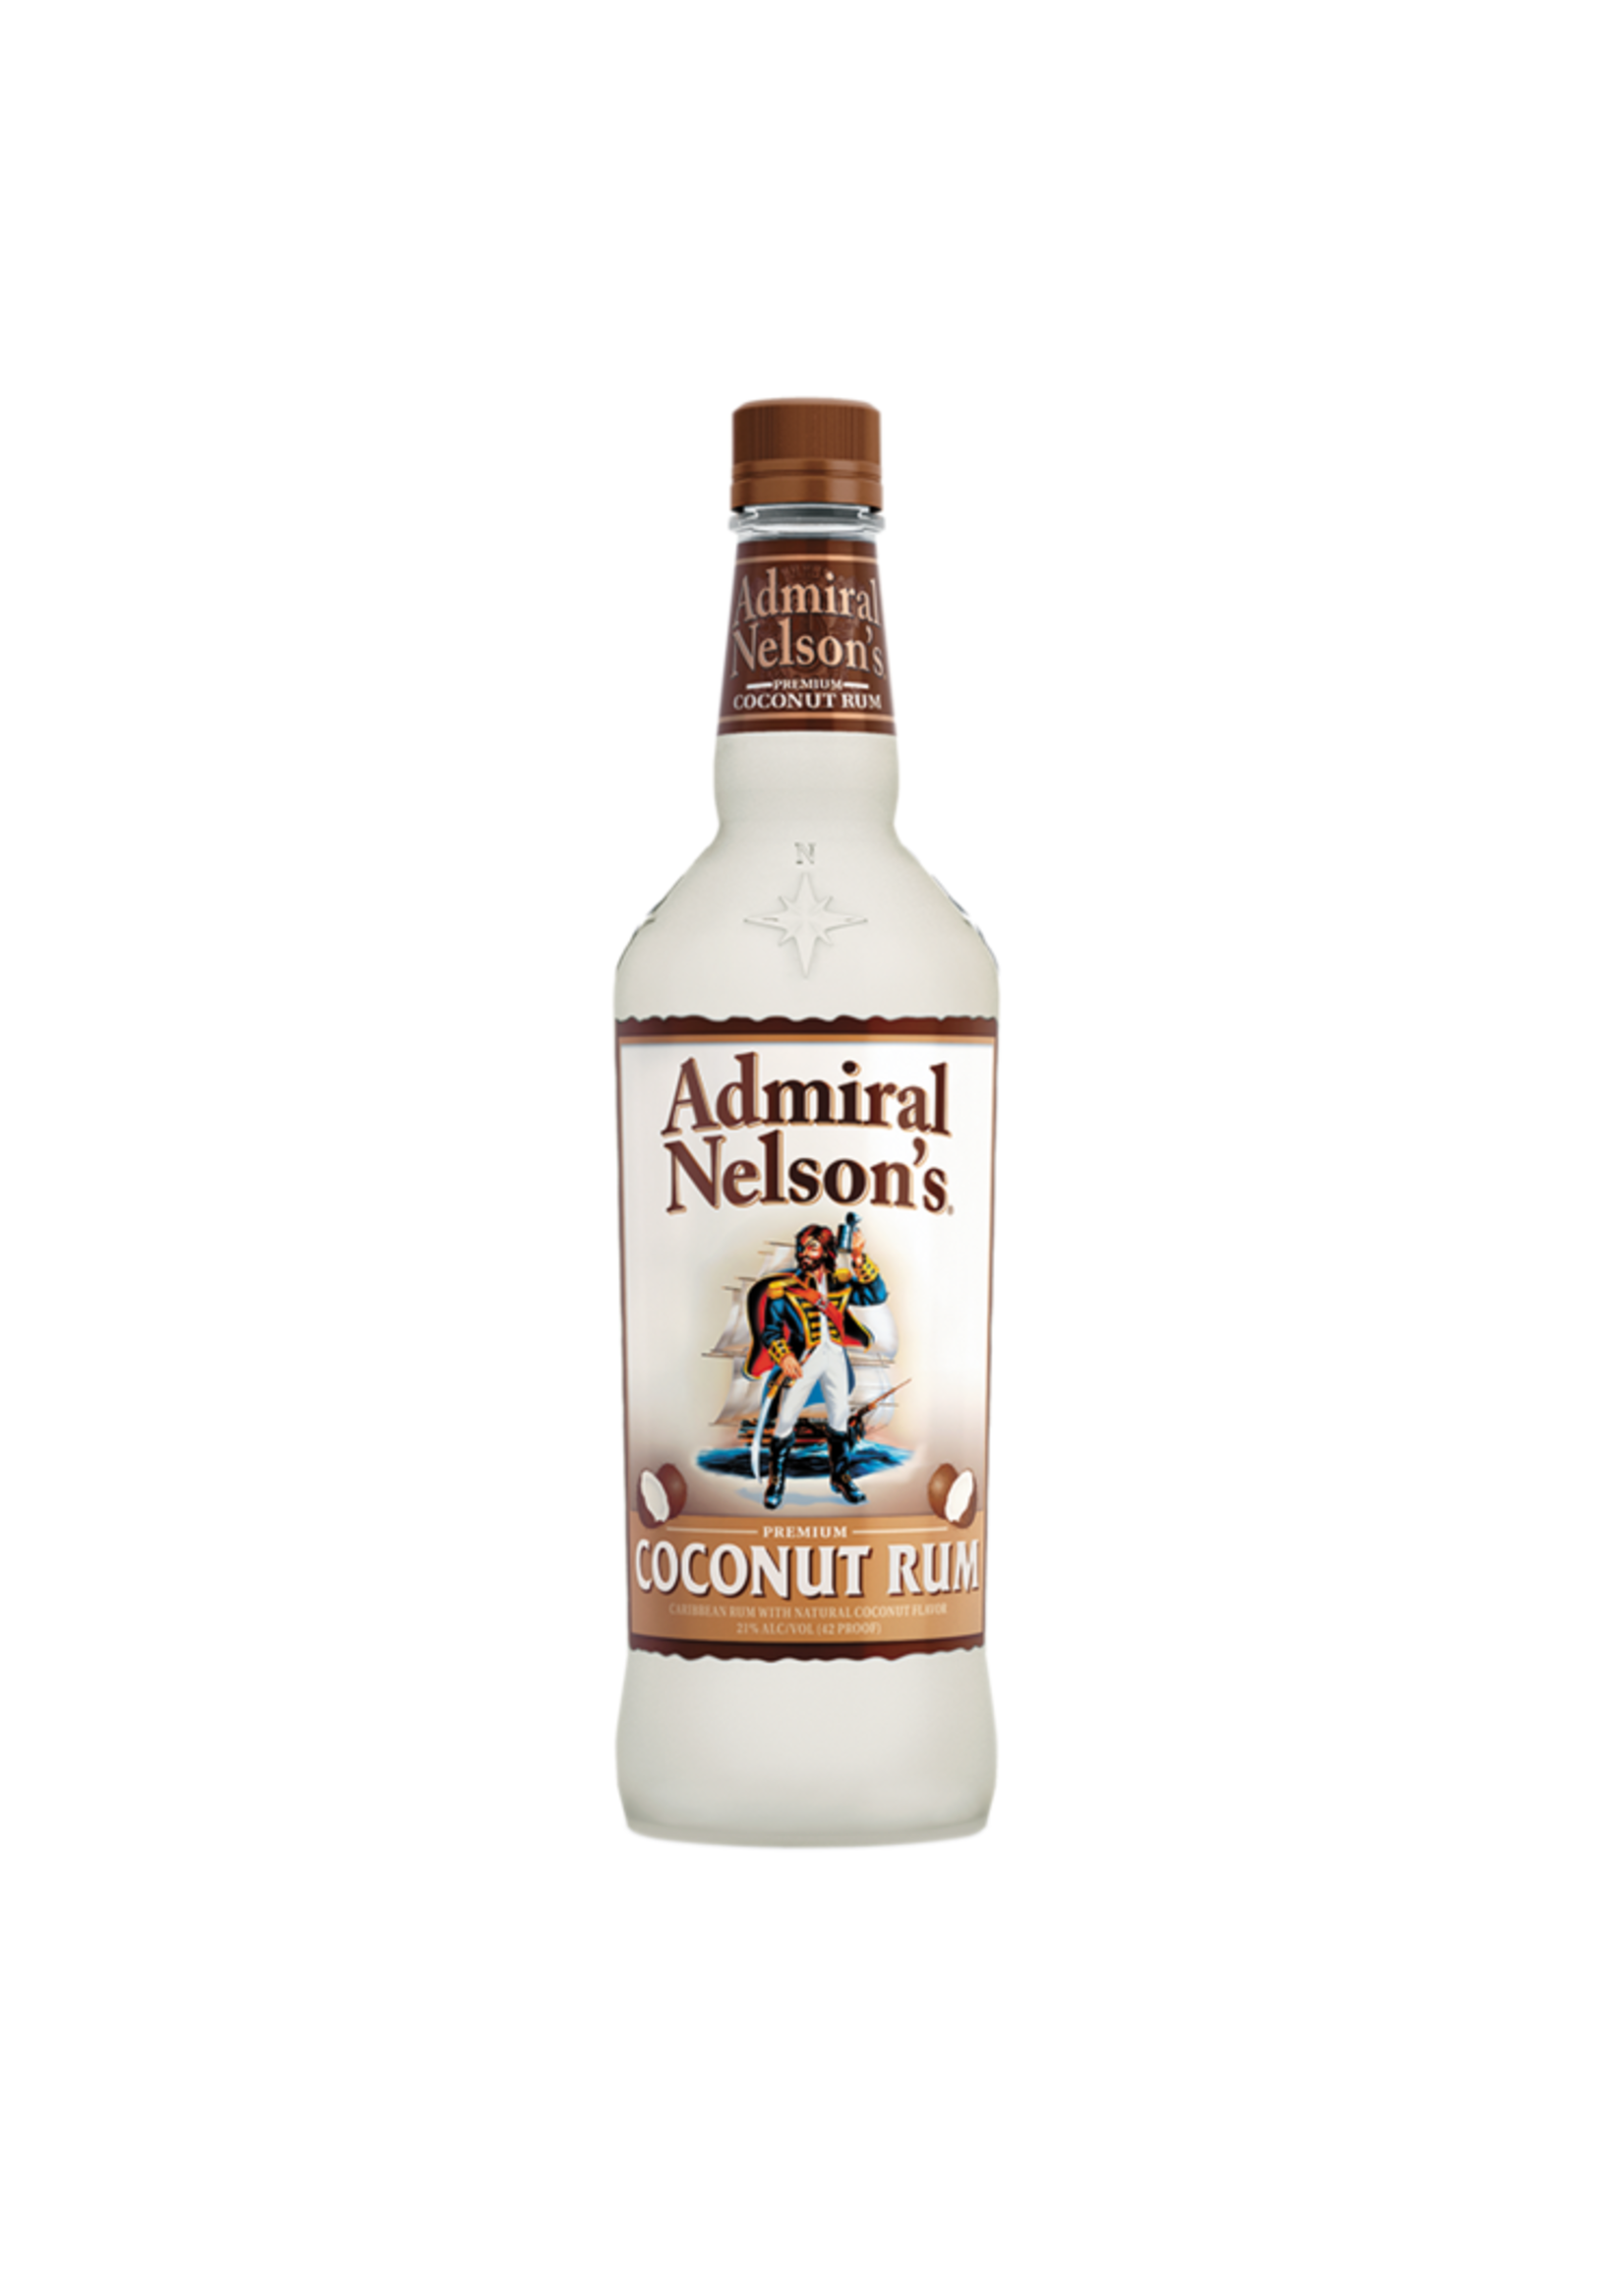 Admiral Nelson Admiral Nelsons Coconut Rum 42Proof 1 Ltr